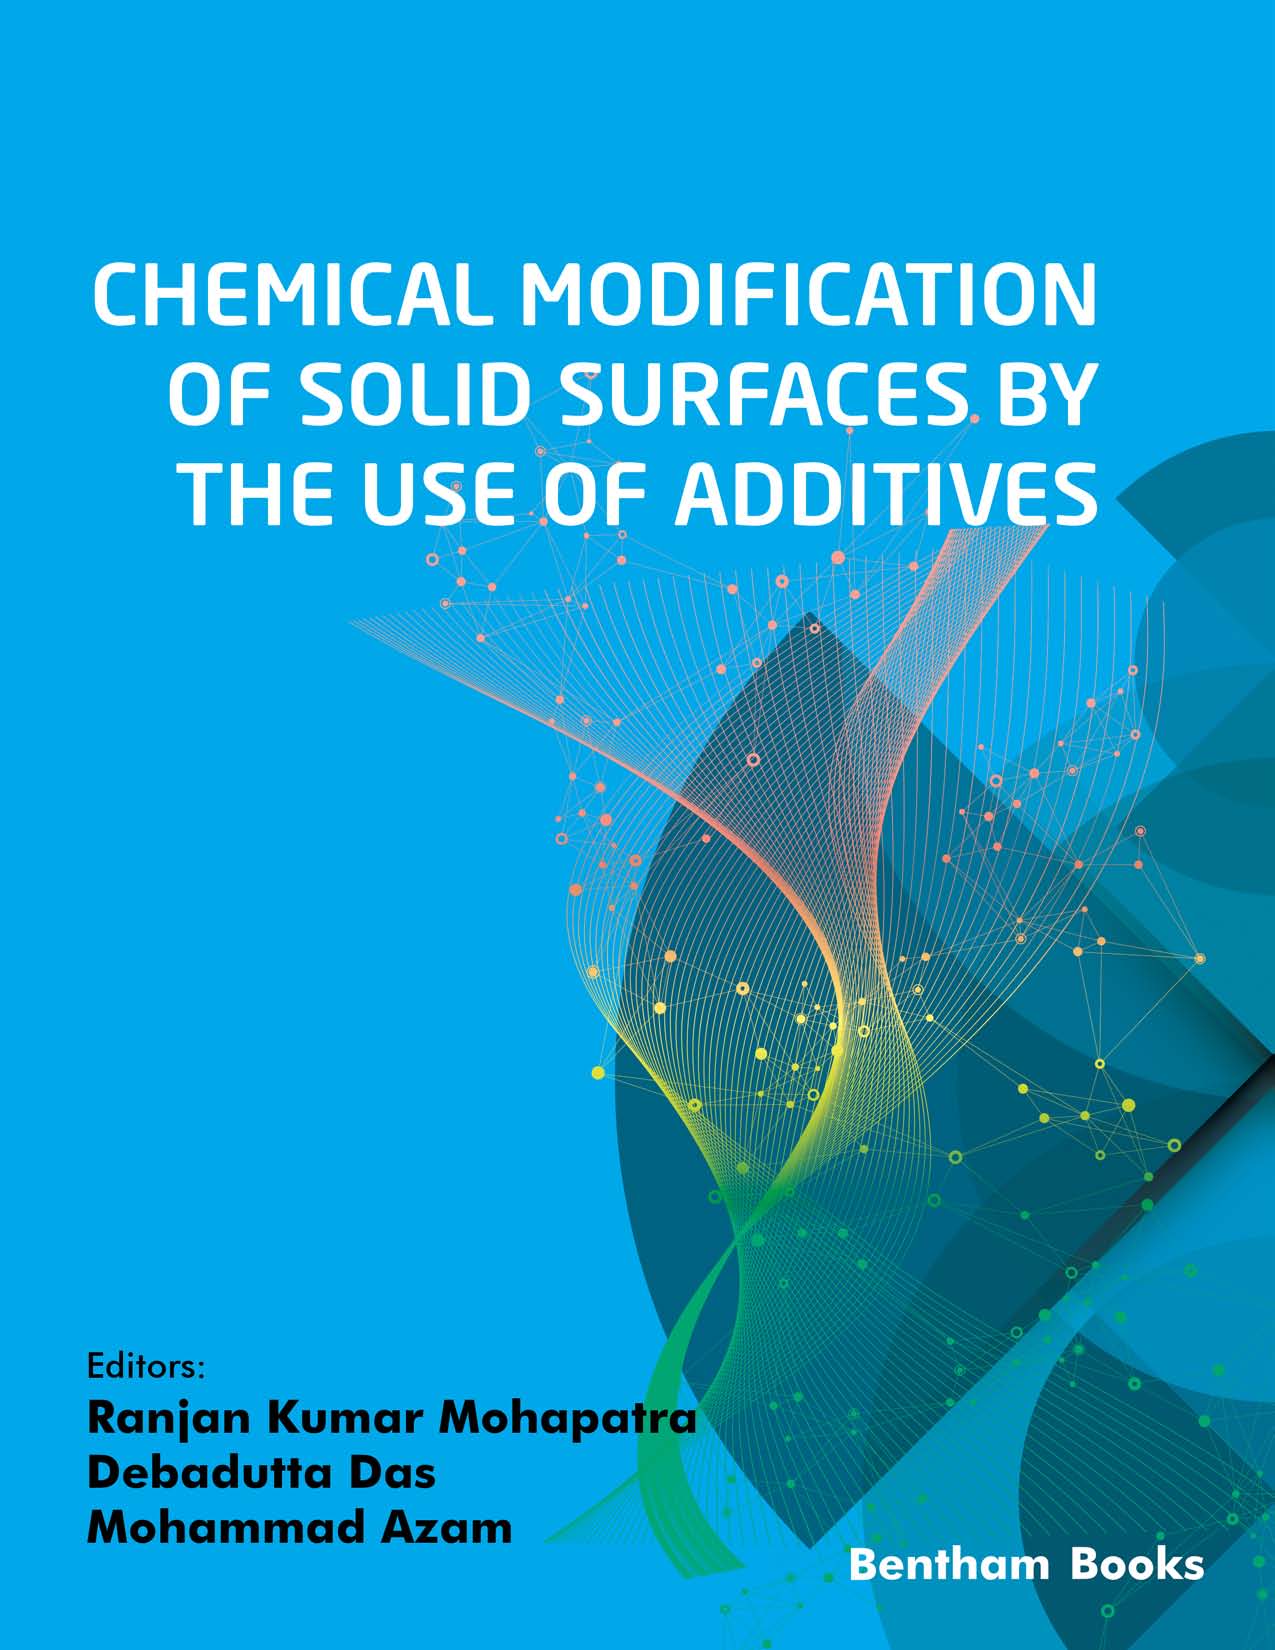 Chemical Modification of Solid Surfaces by the Use of Additives